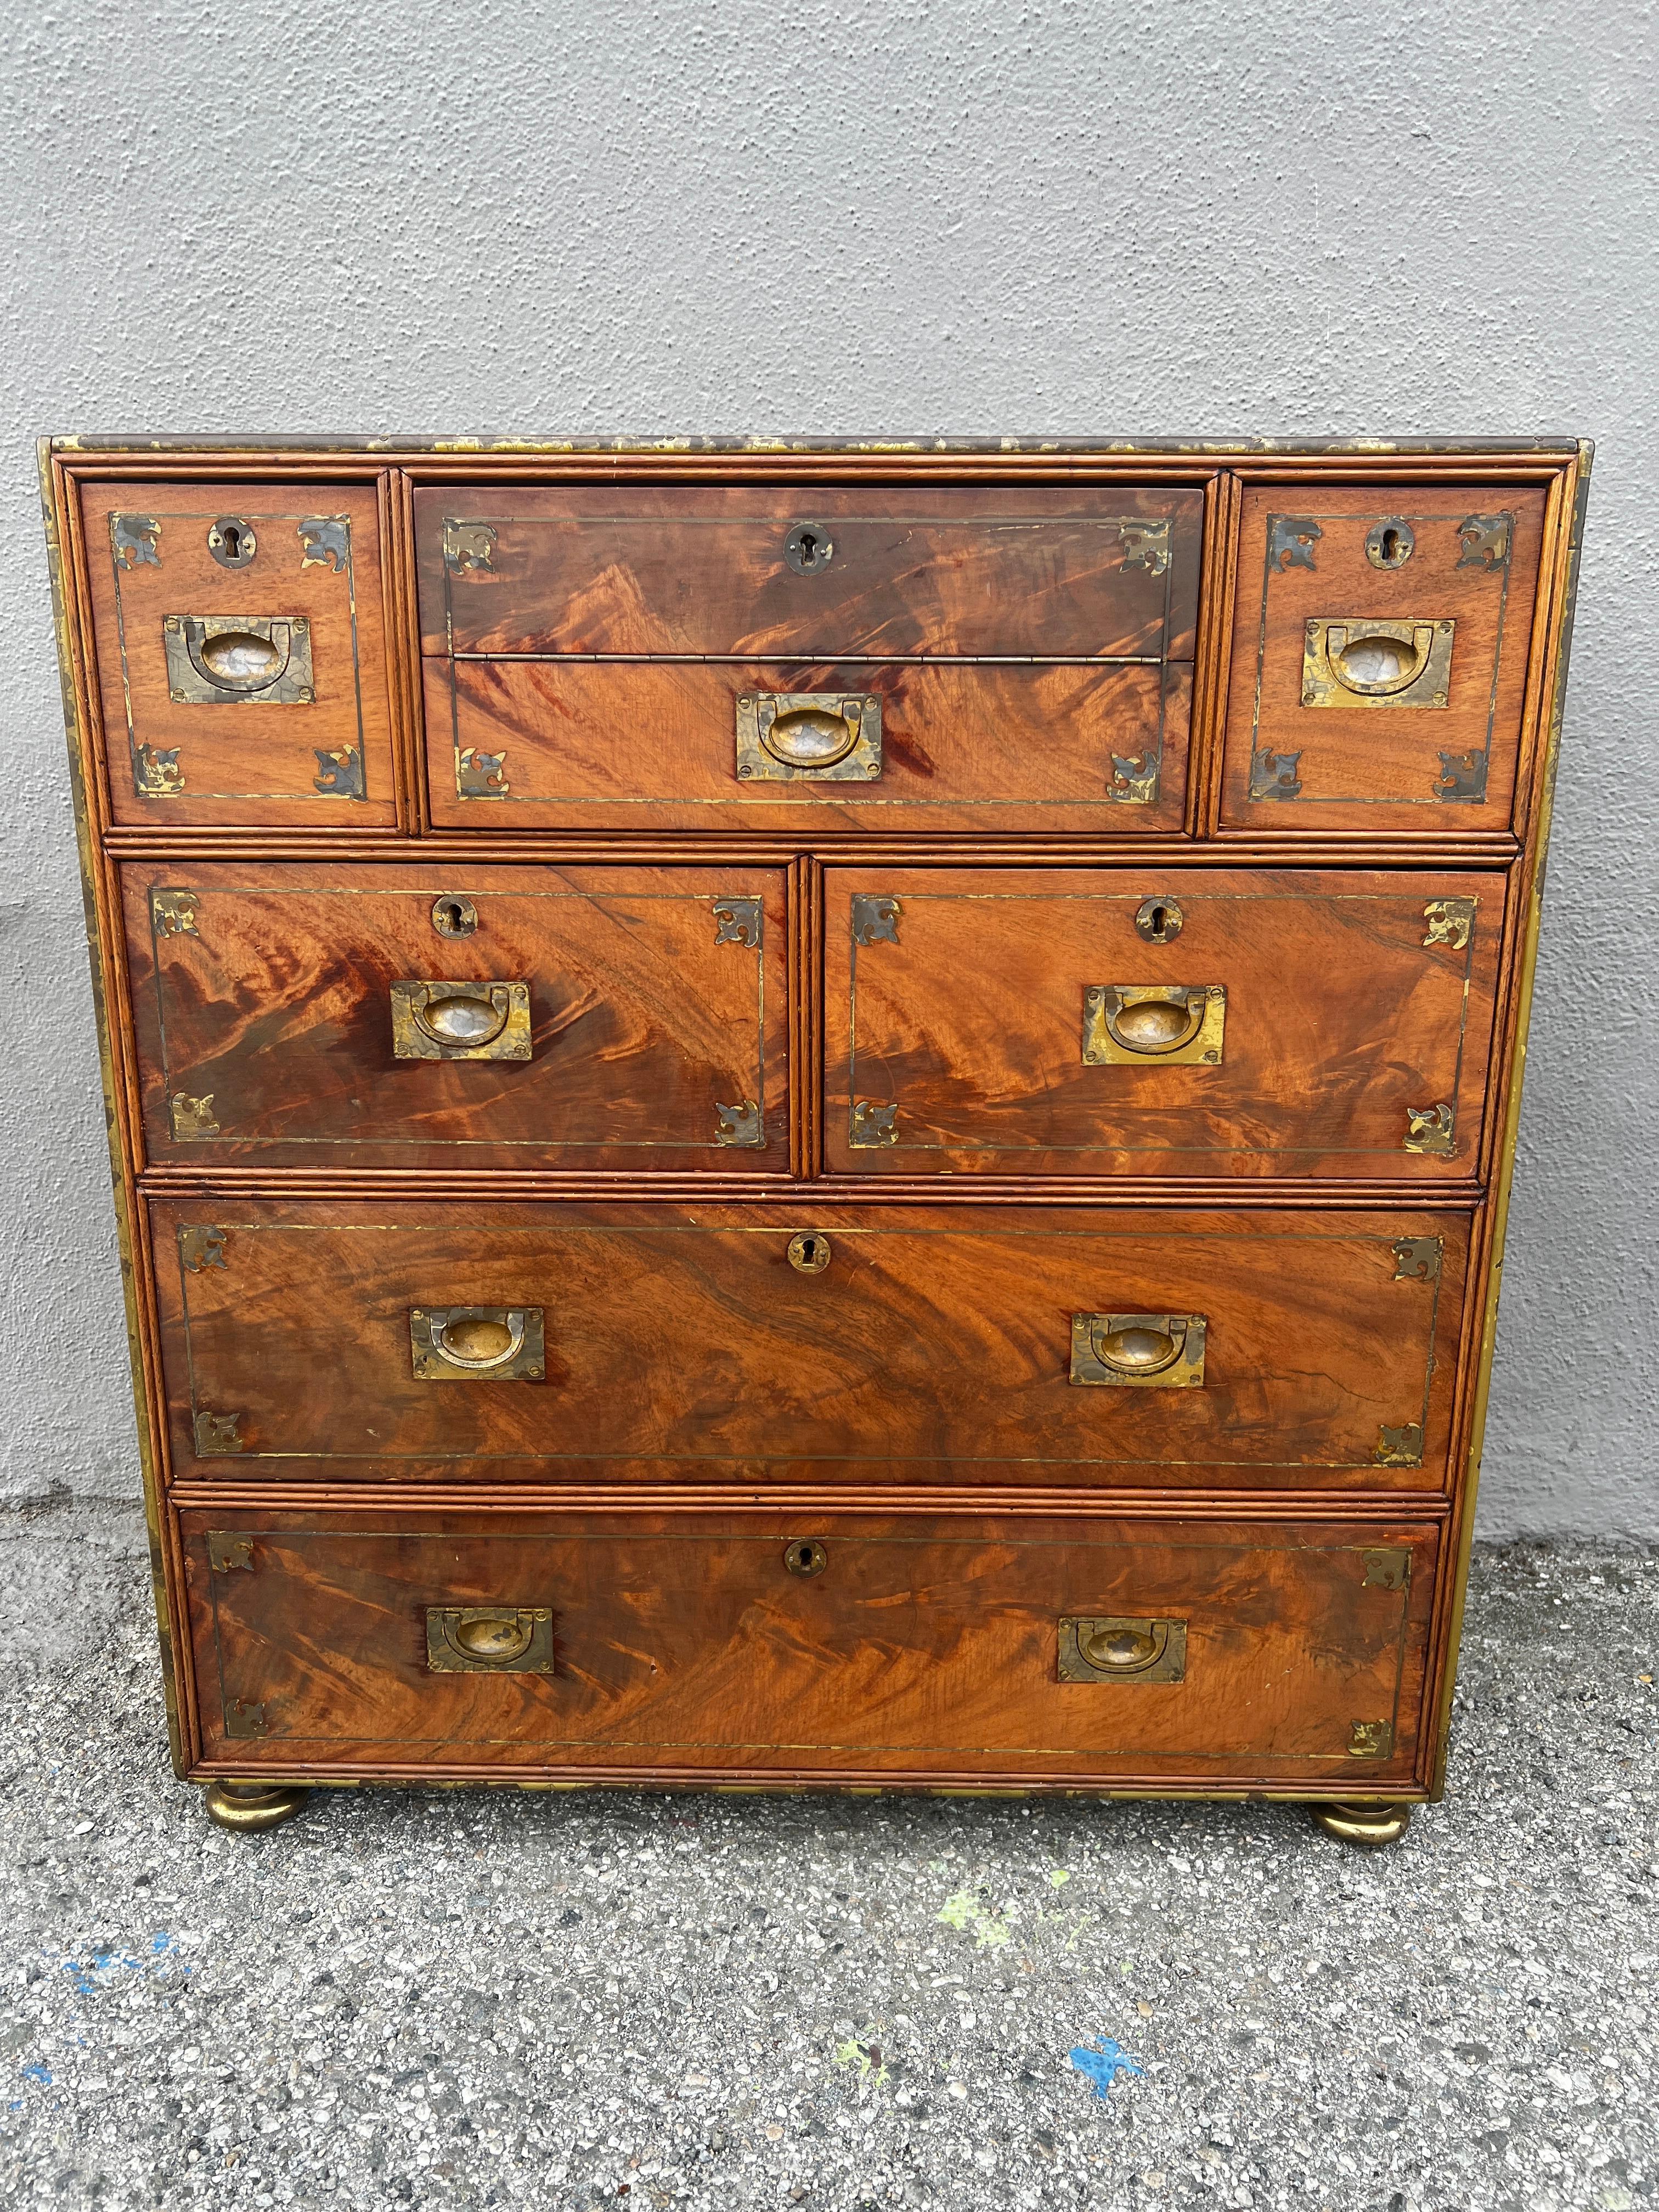 Anglo Raj Regency Campaign Chest with Desk Trimmed in Brass Banding Accents 1811 For Sale 6